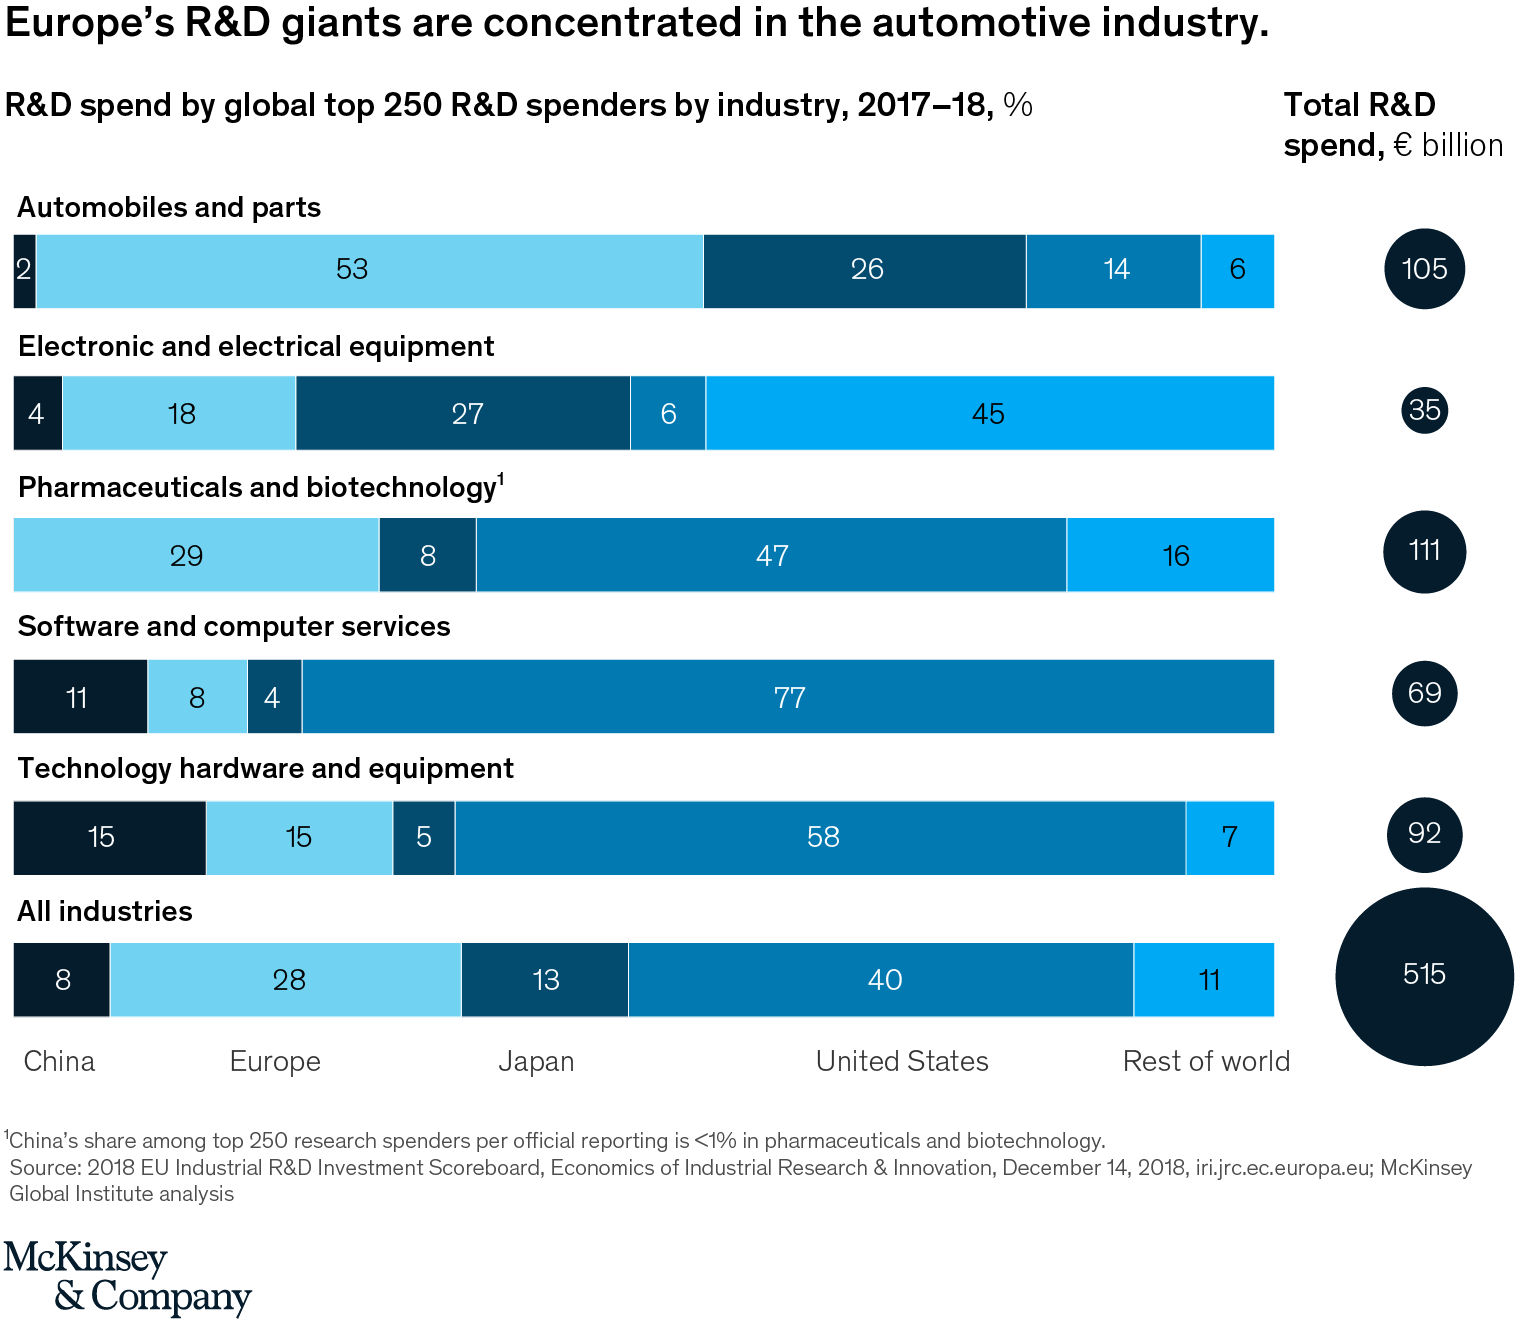 Europe’s R&D giants are concentrated in the automotive industry.